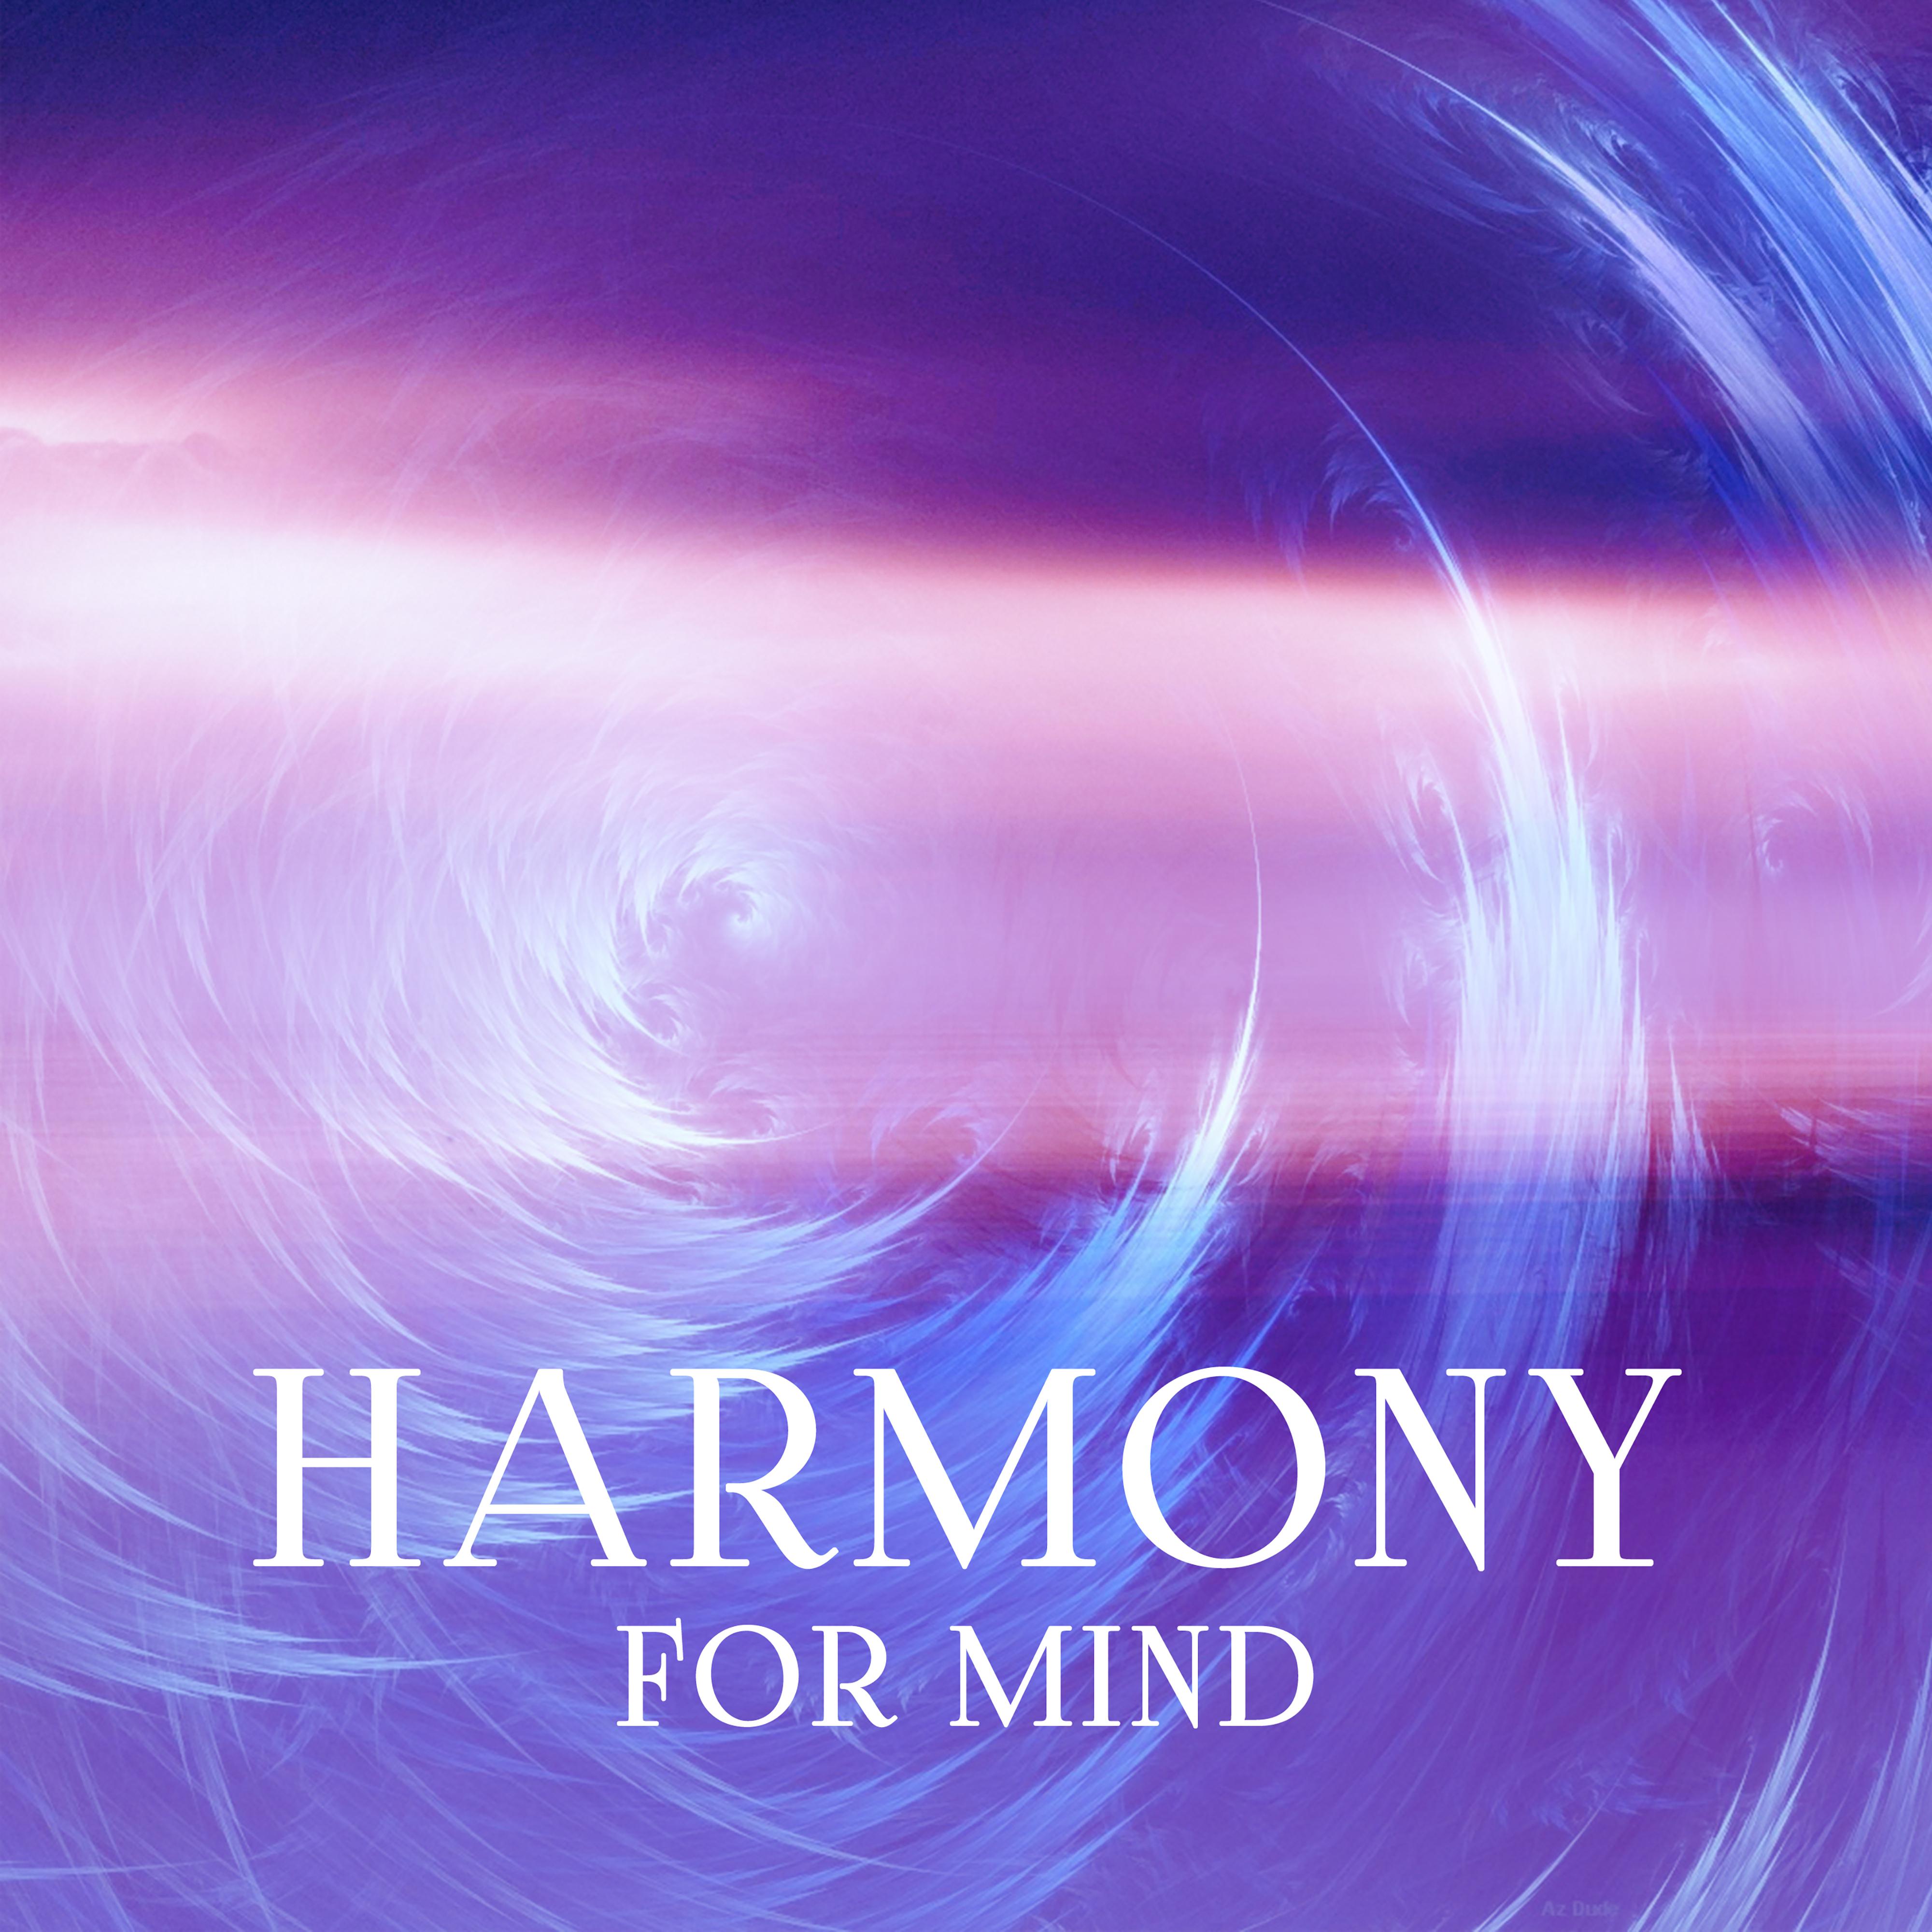 Harmony for Mind – Best New Age Music, Stress Free, Peaceful Mind, Nature Sounds, Healing Water, Tibetan Music